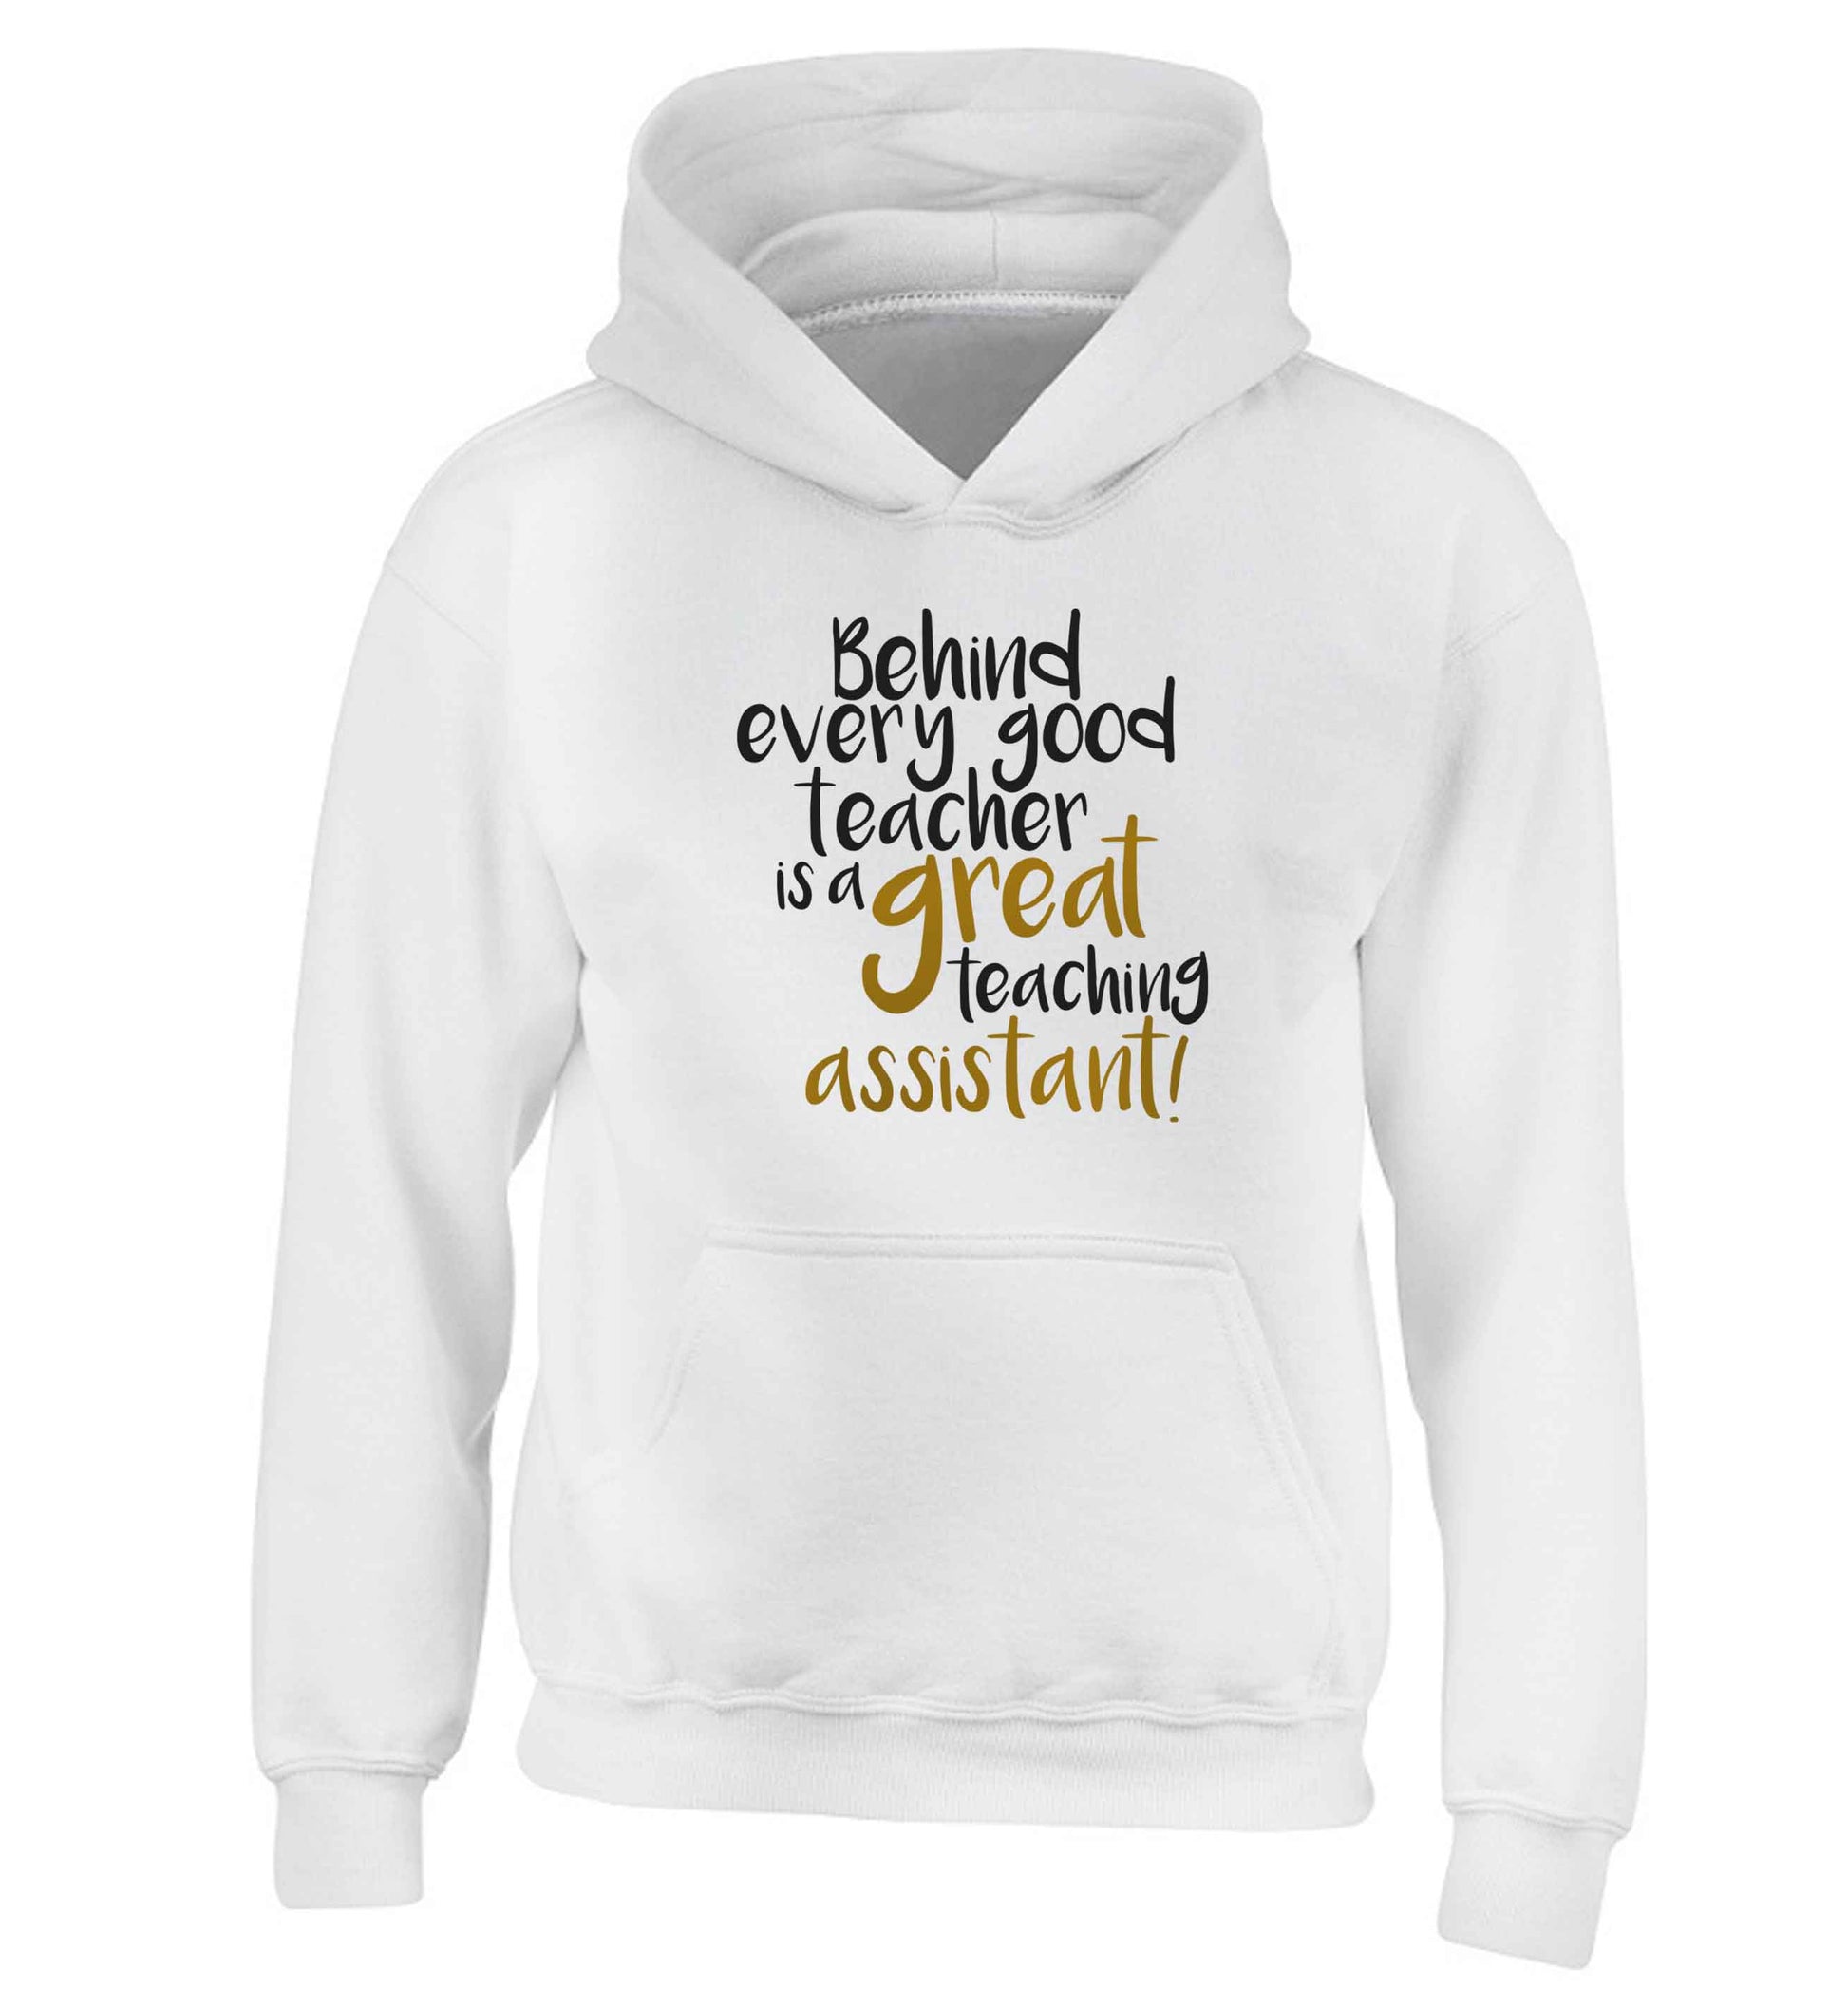 Behind every good teacher is a great teaching assistant children's white hoodie 12-13 Years